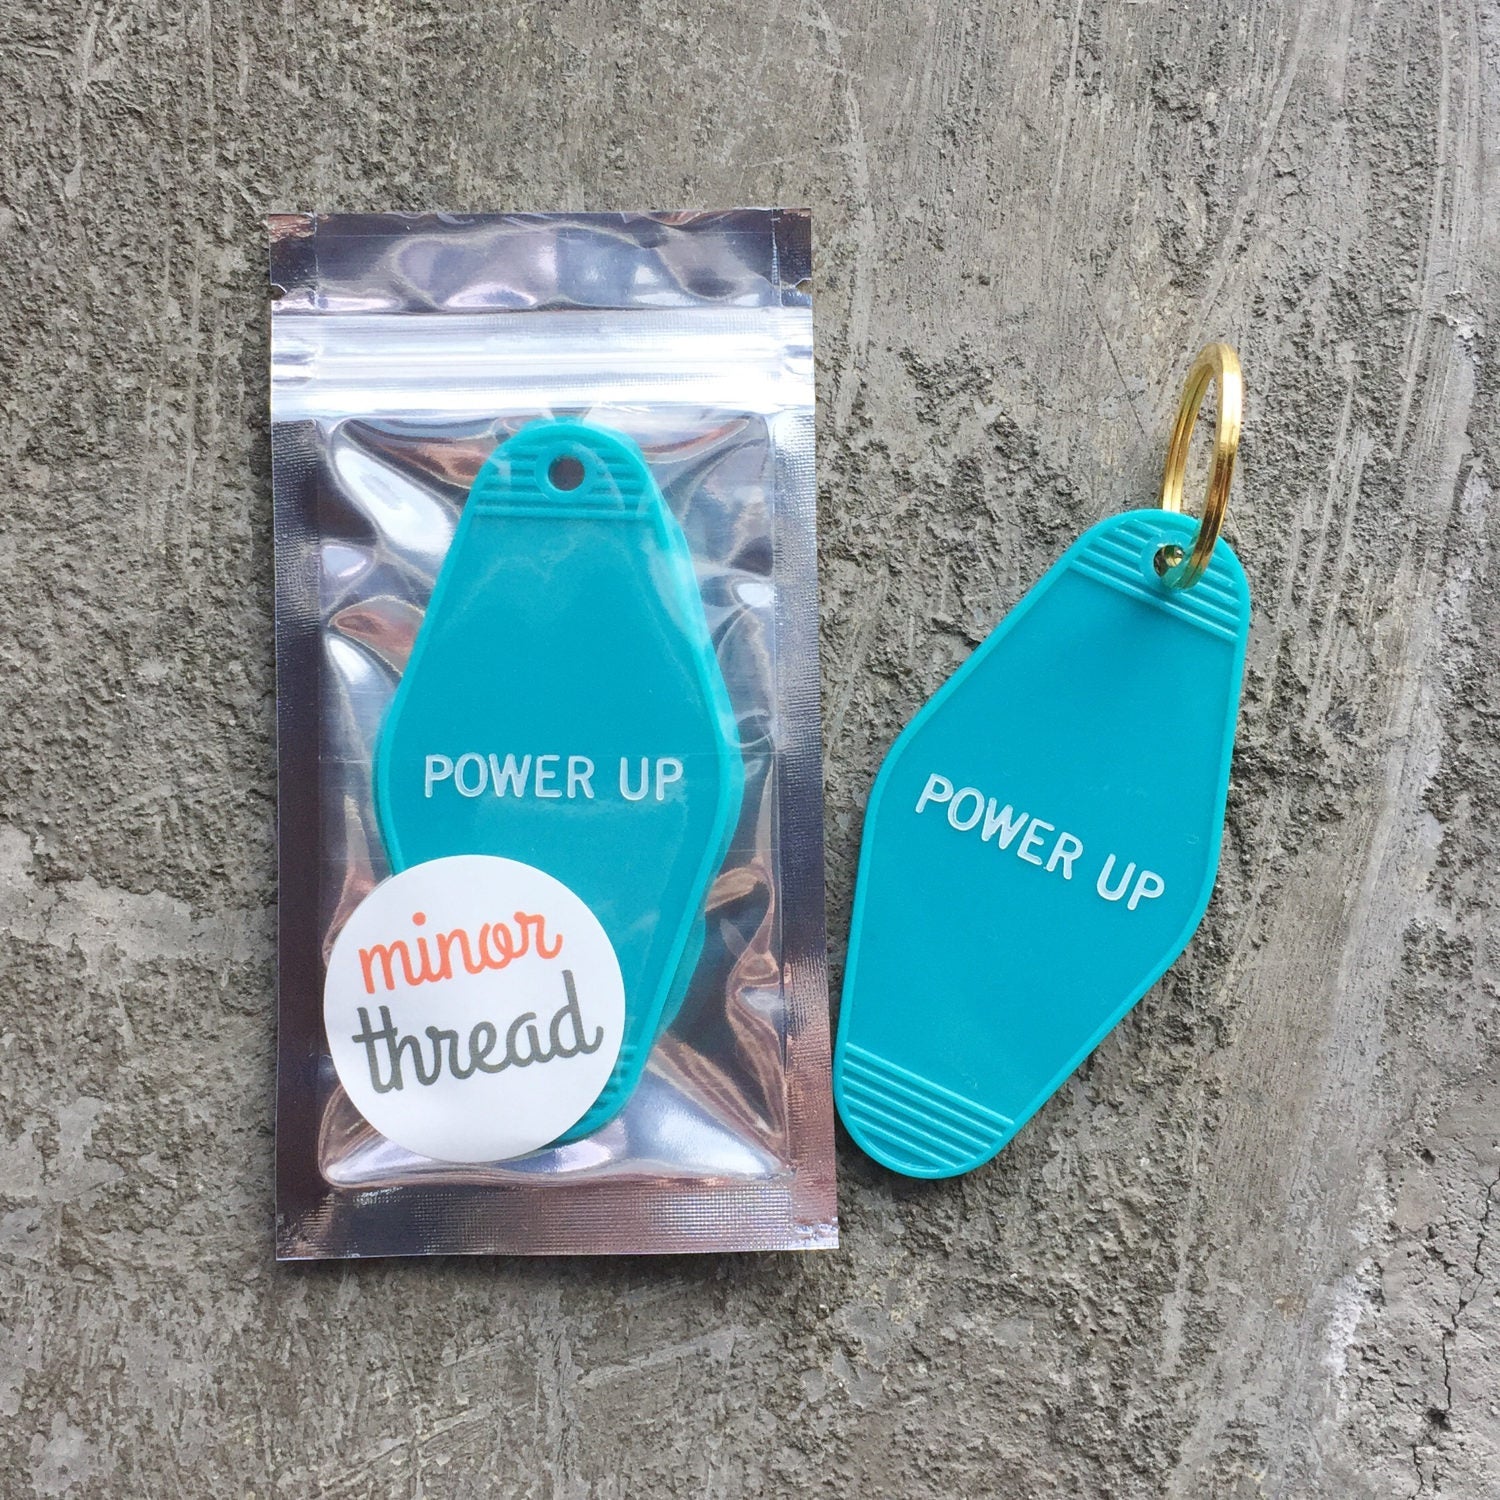 Power Up Keychain in Turquoise